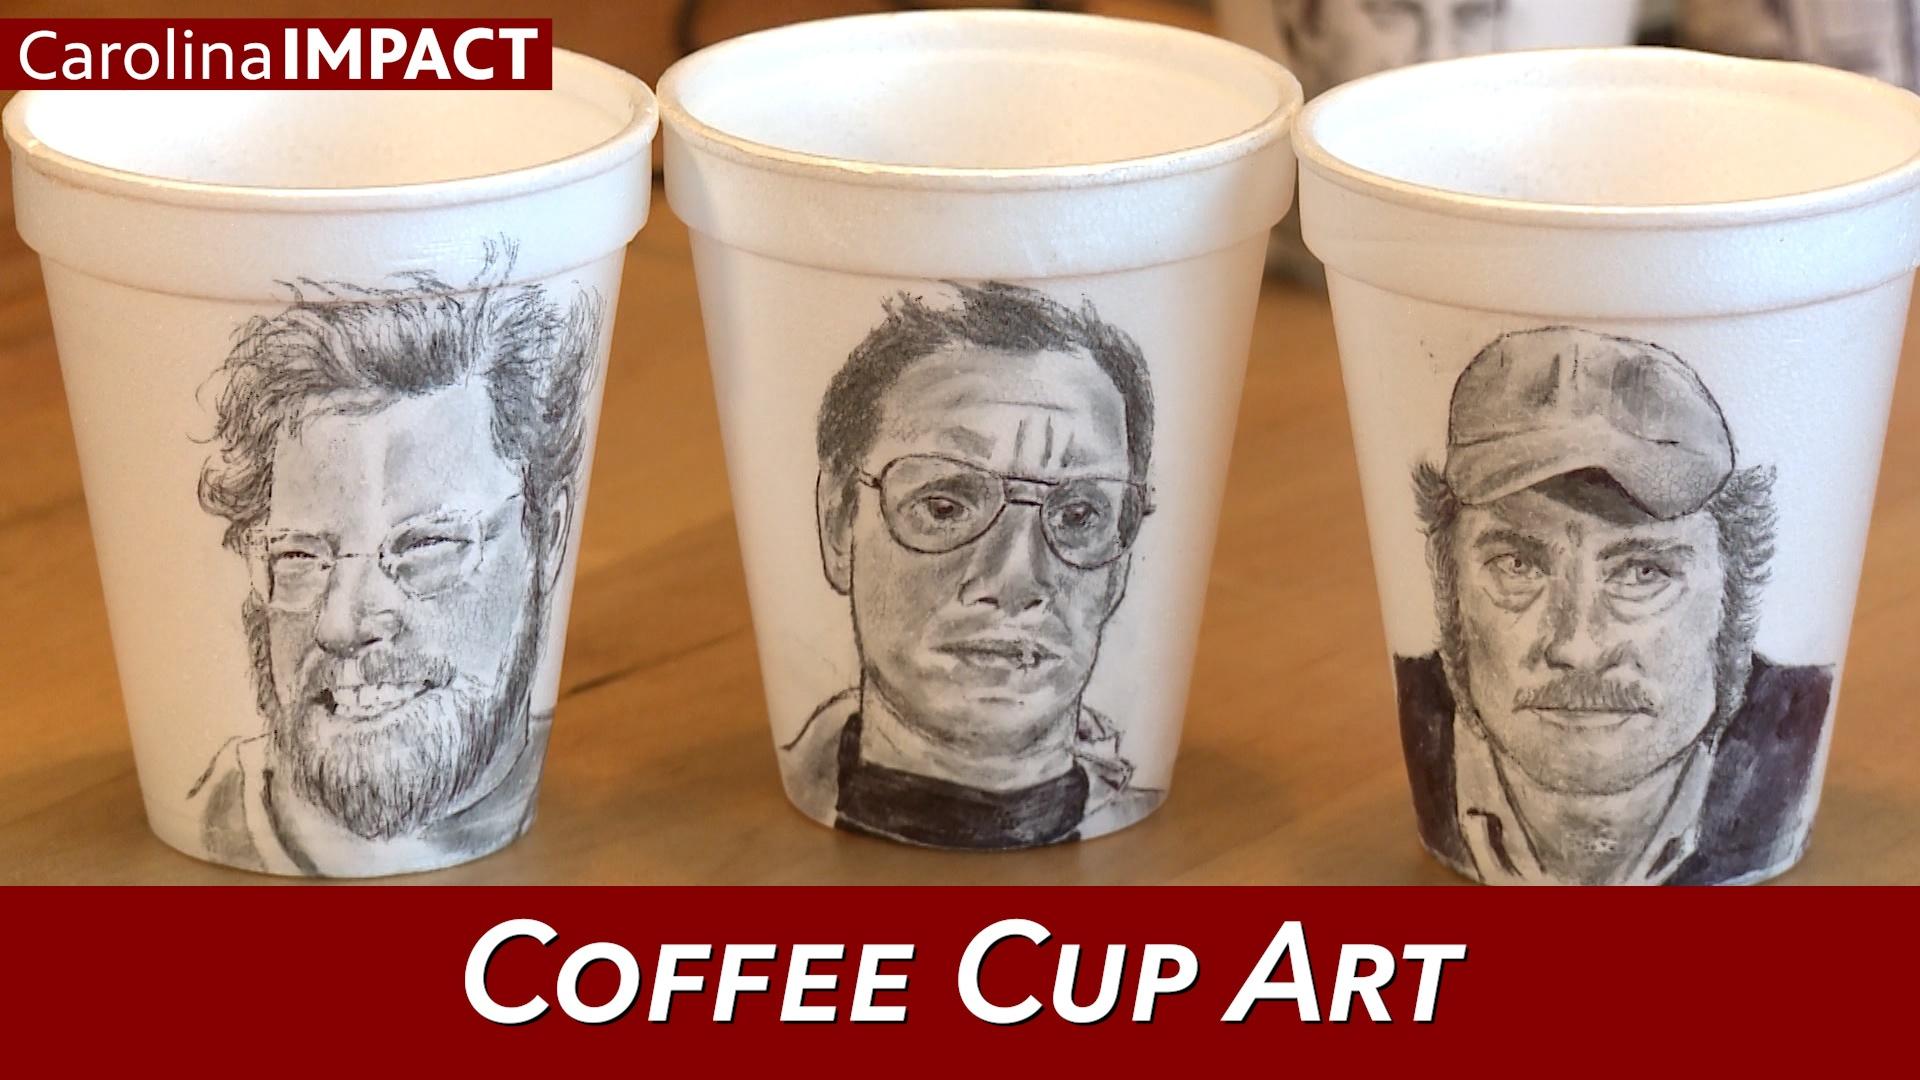 coffee bar funny word art paper cups